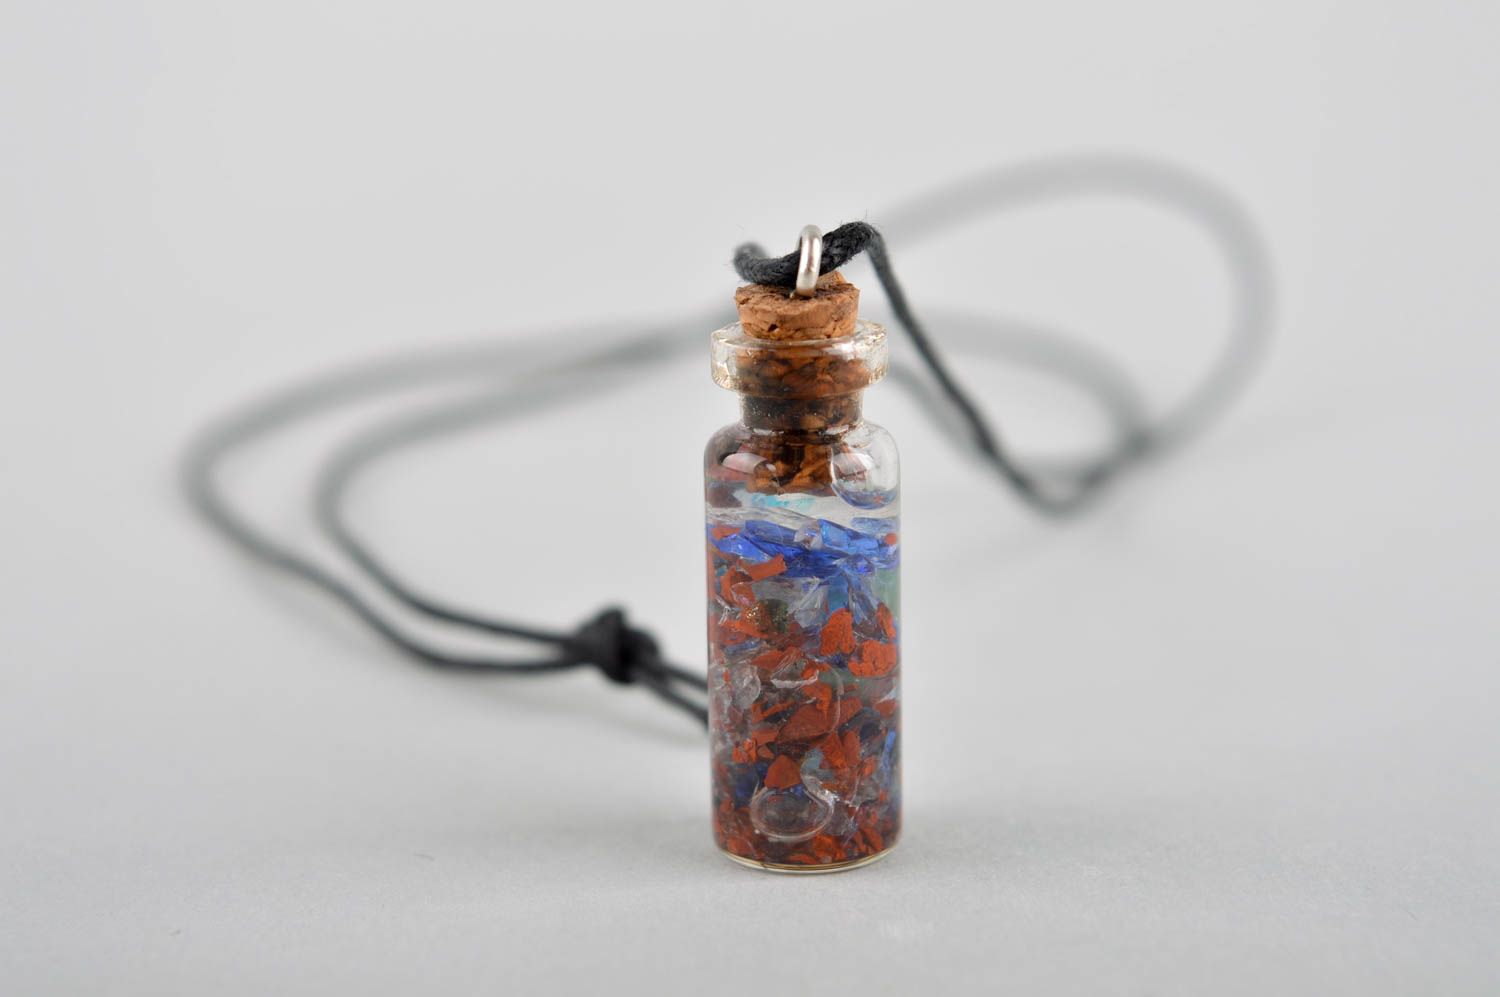 Handmade glass vial necklace fashion necklace designer jewelry gifts for girls photo 4